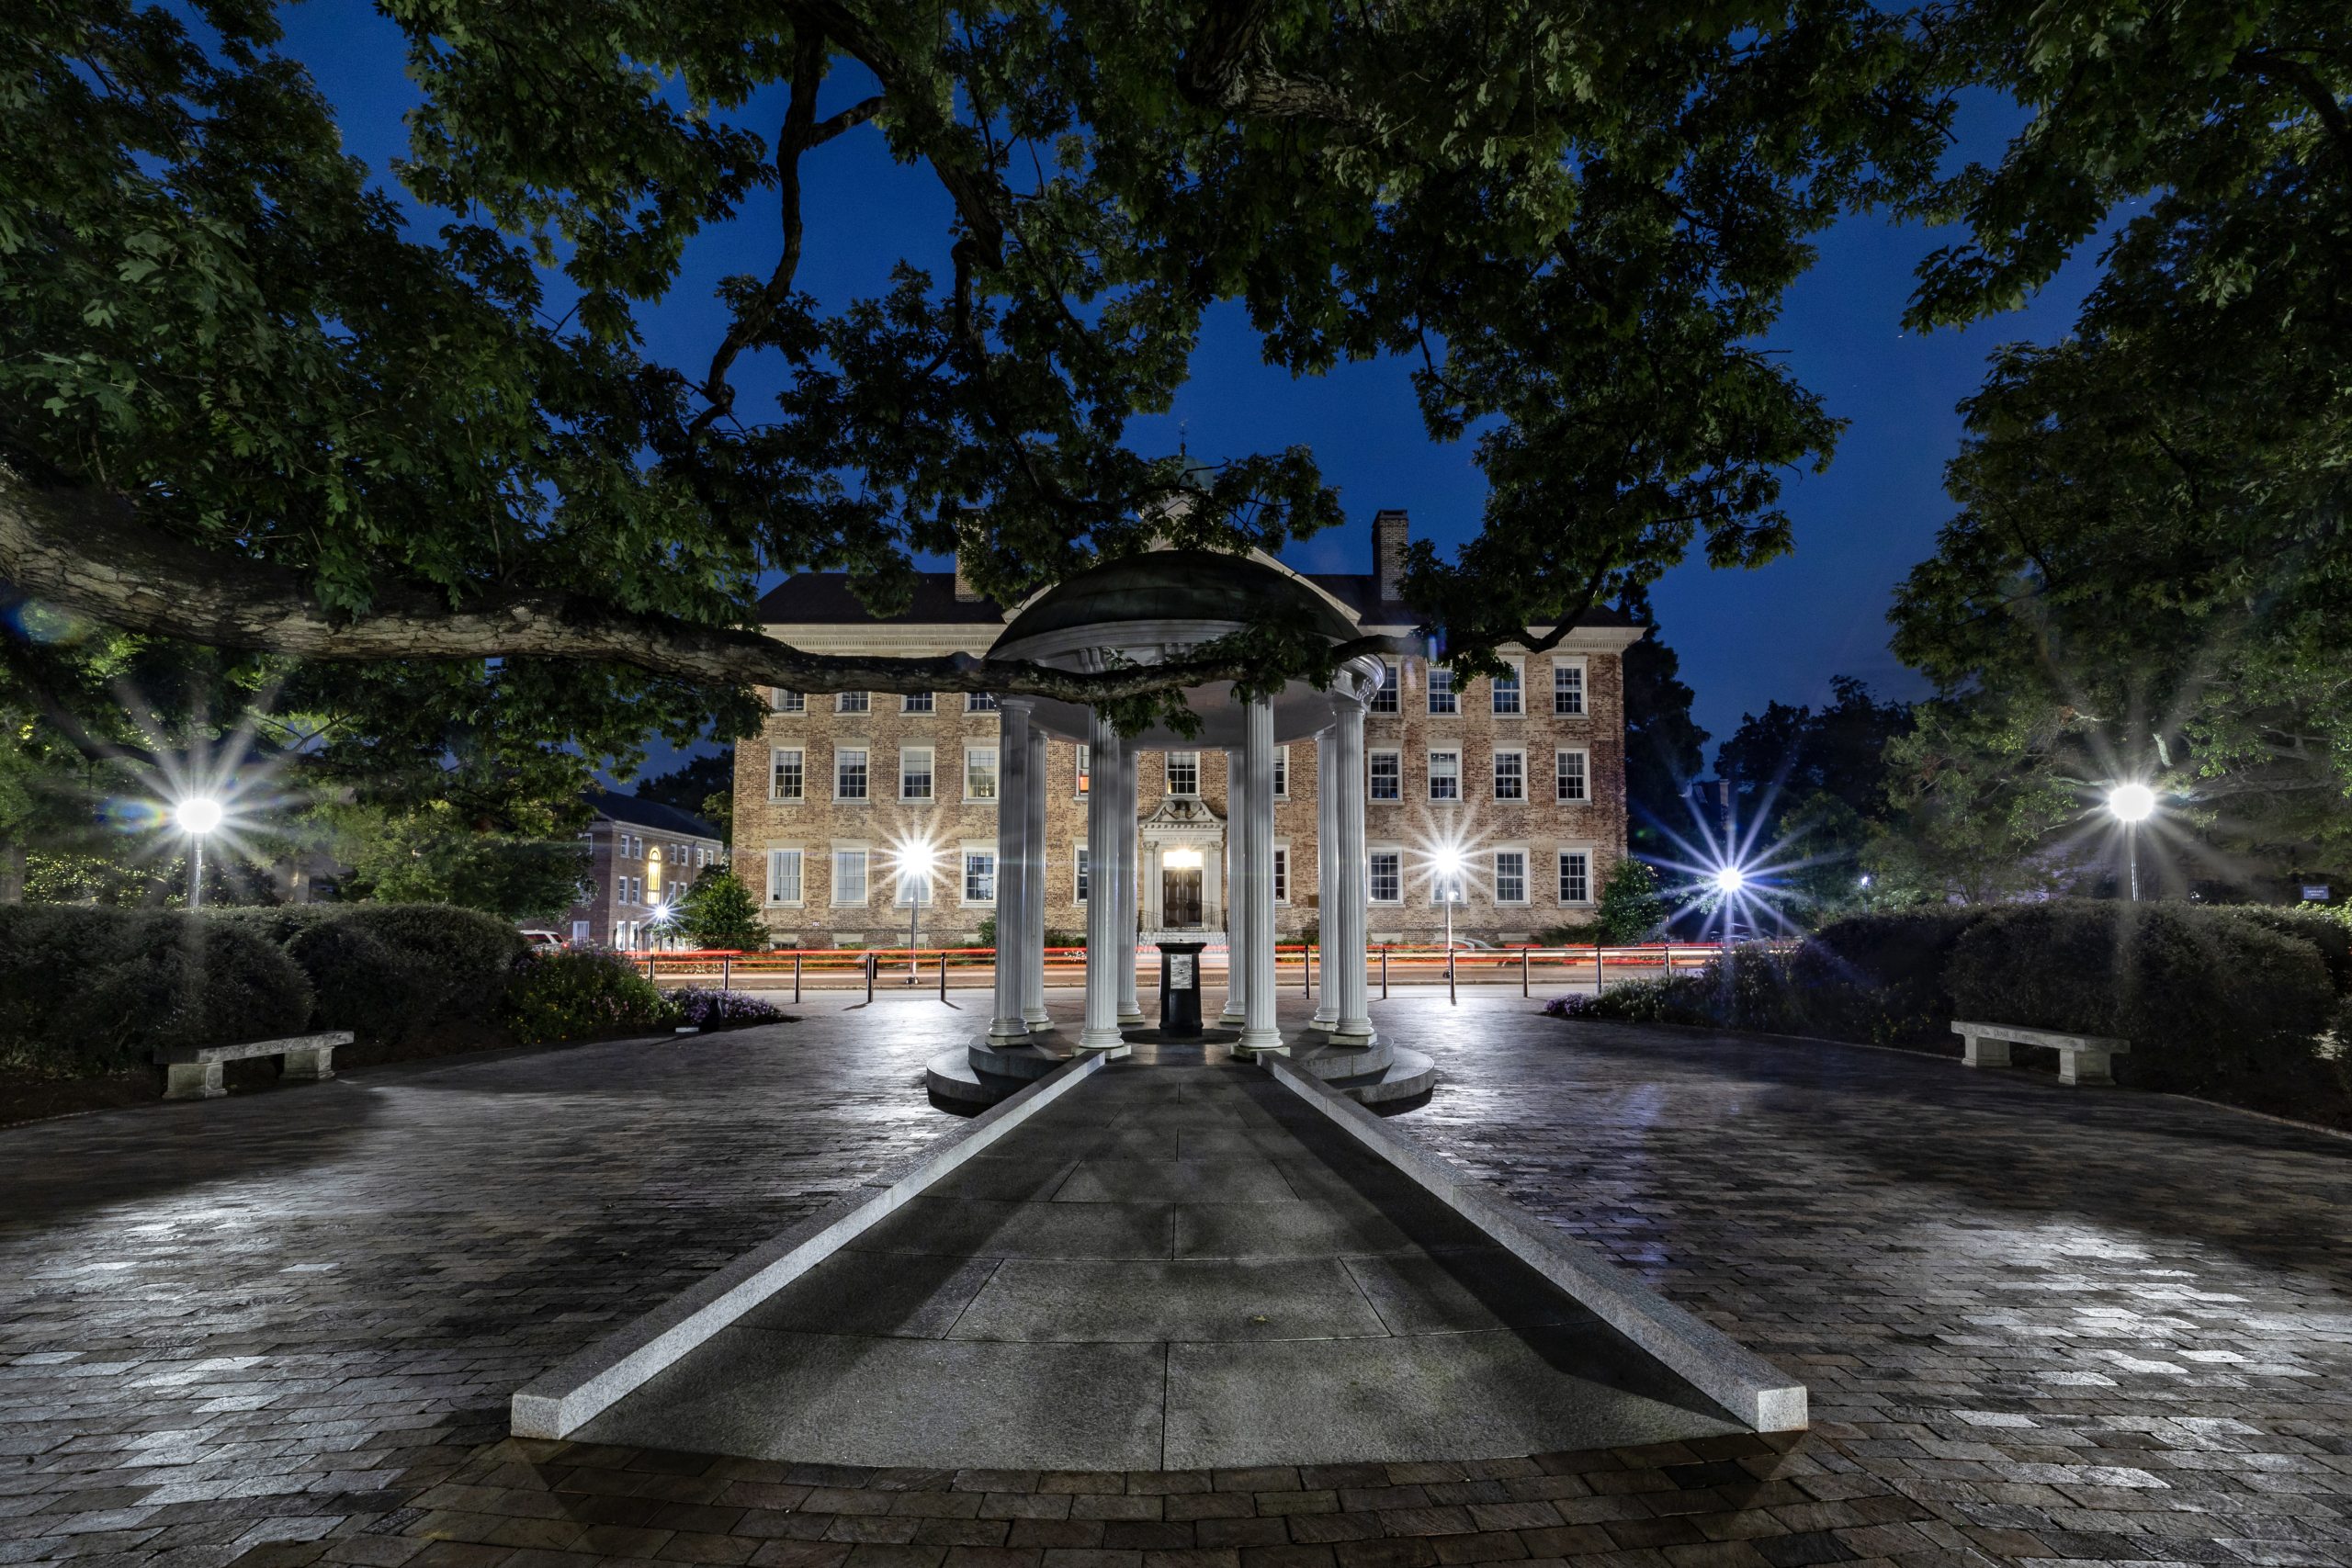 View of the Old Well on the campus of UNC-Chapel Hill at dusk.